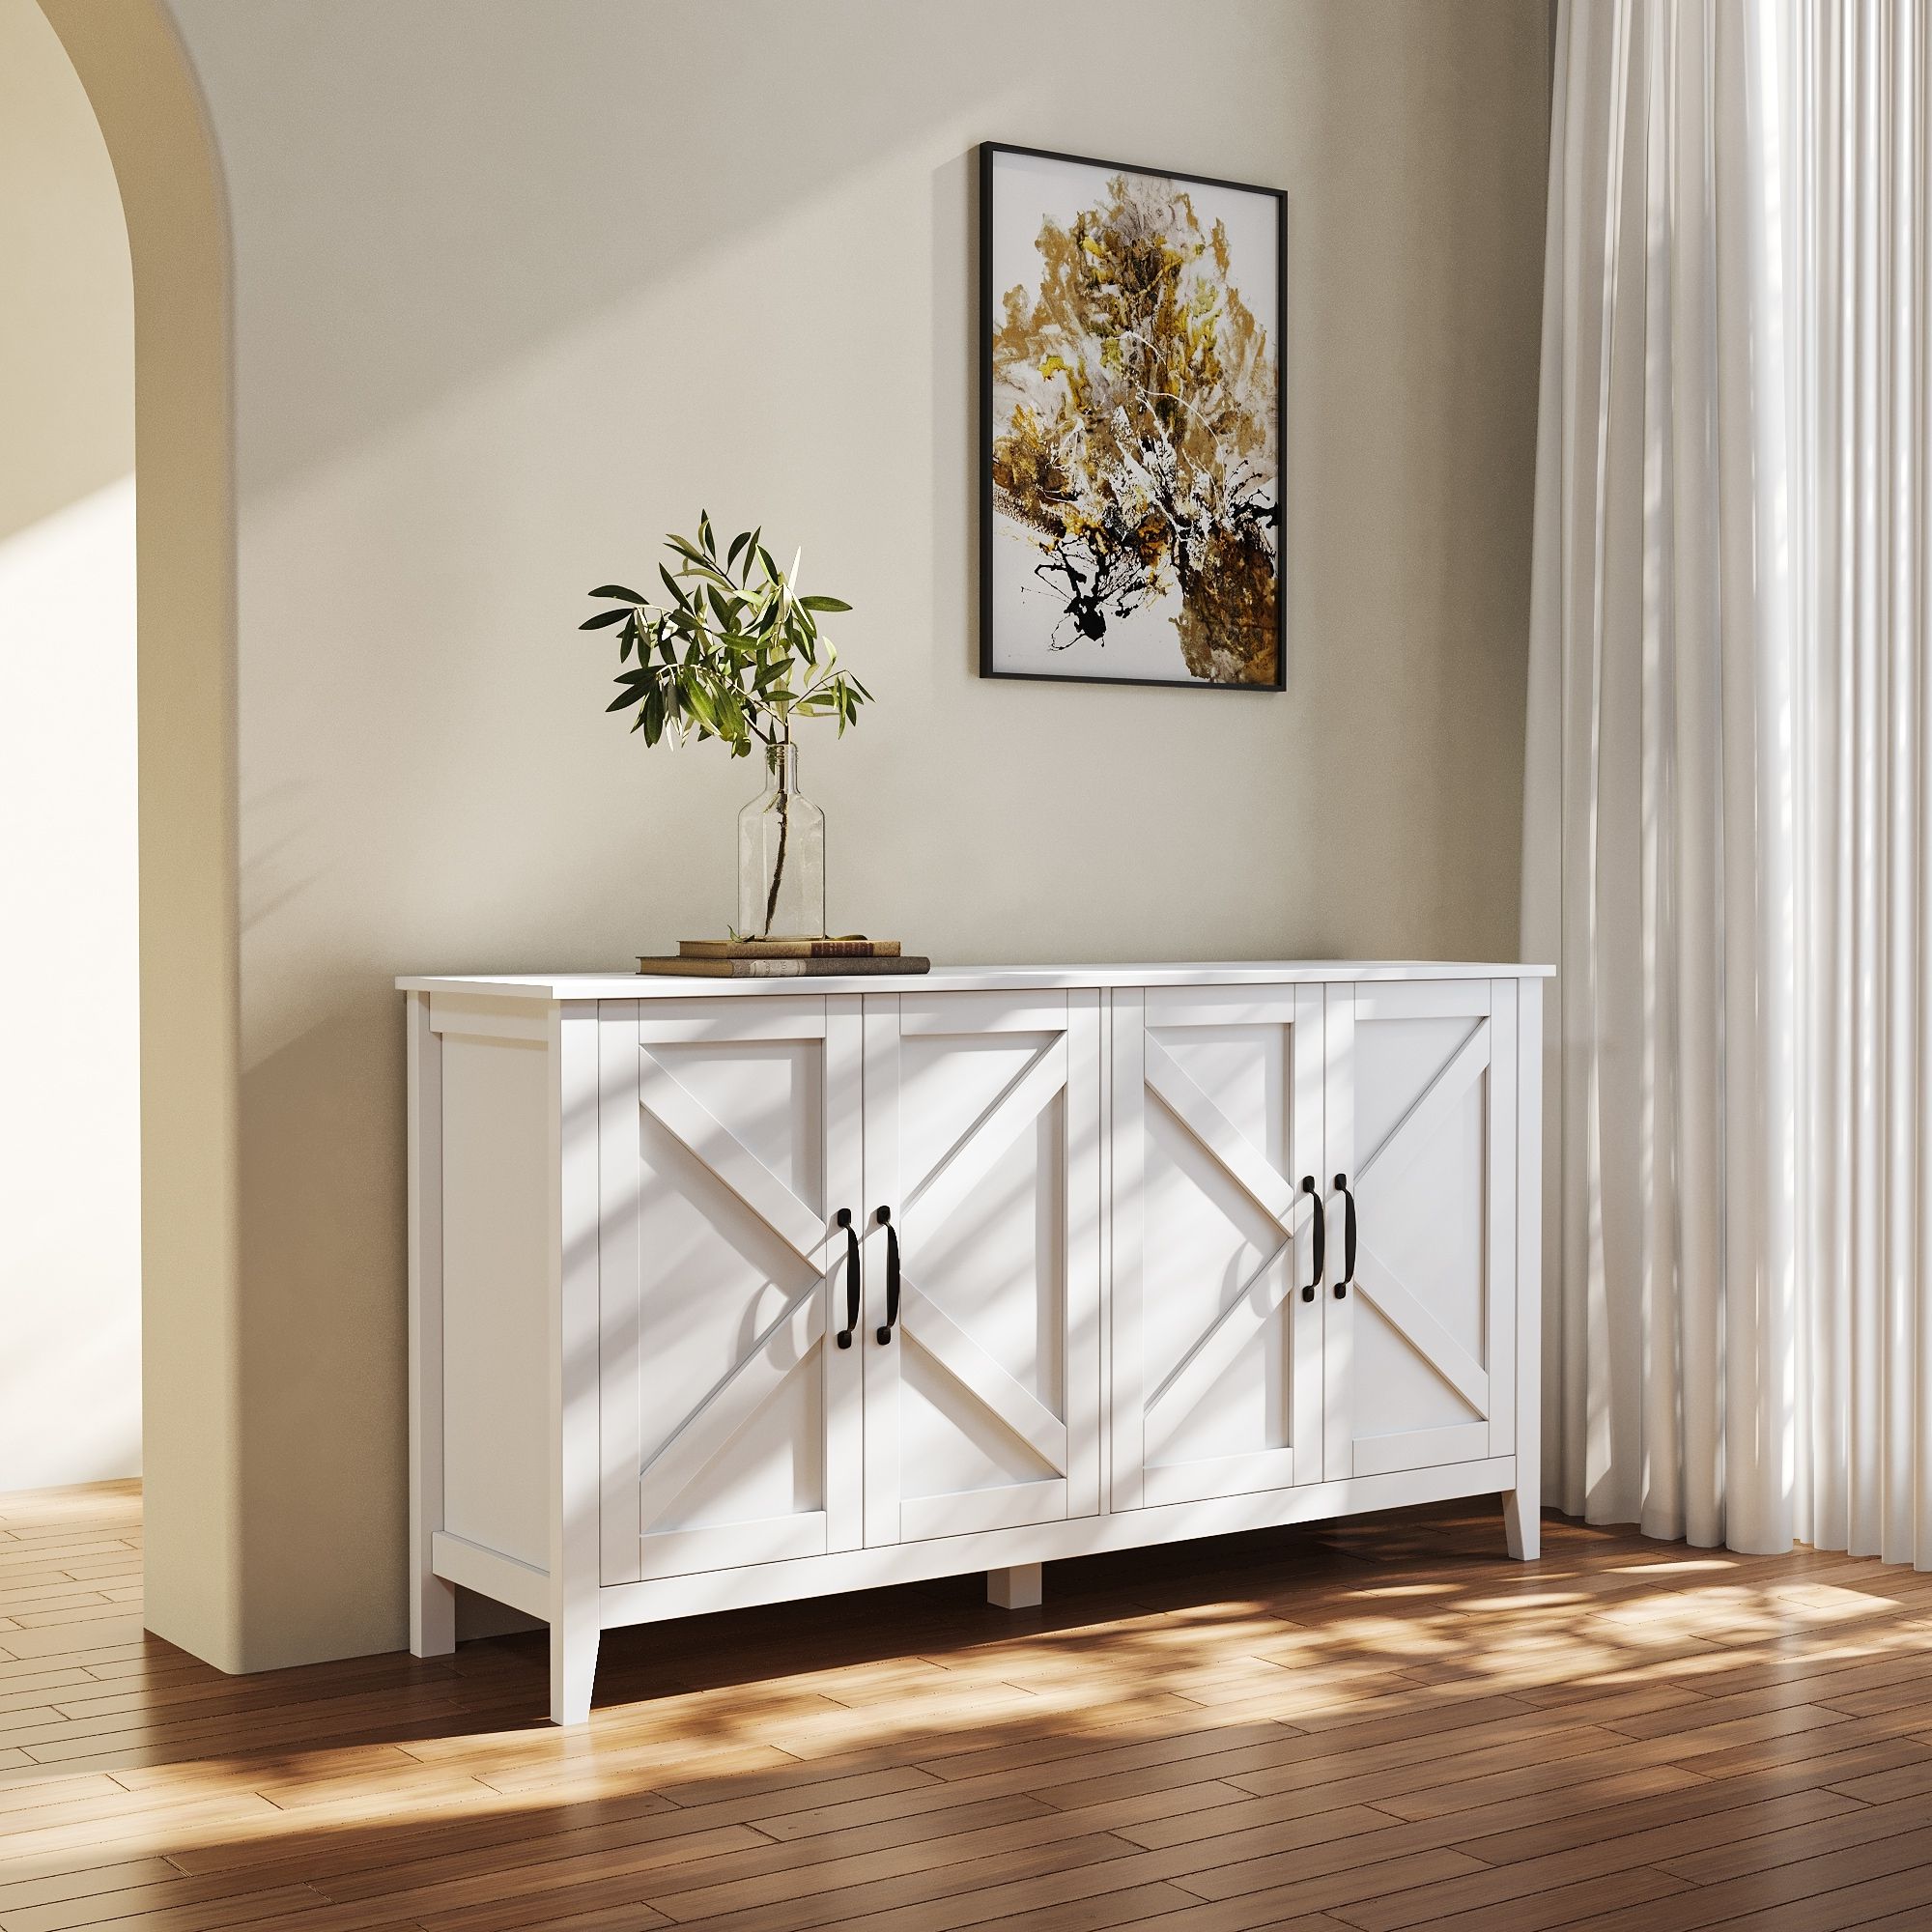 Sideboard Storage Entryway Floor Cabinet With 4 Shelves – Bed Bath & Beyond  – 37068169 Regarding Sideboards For Entryway (View 8 of 20)